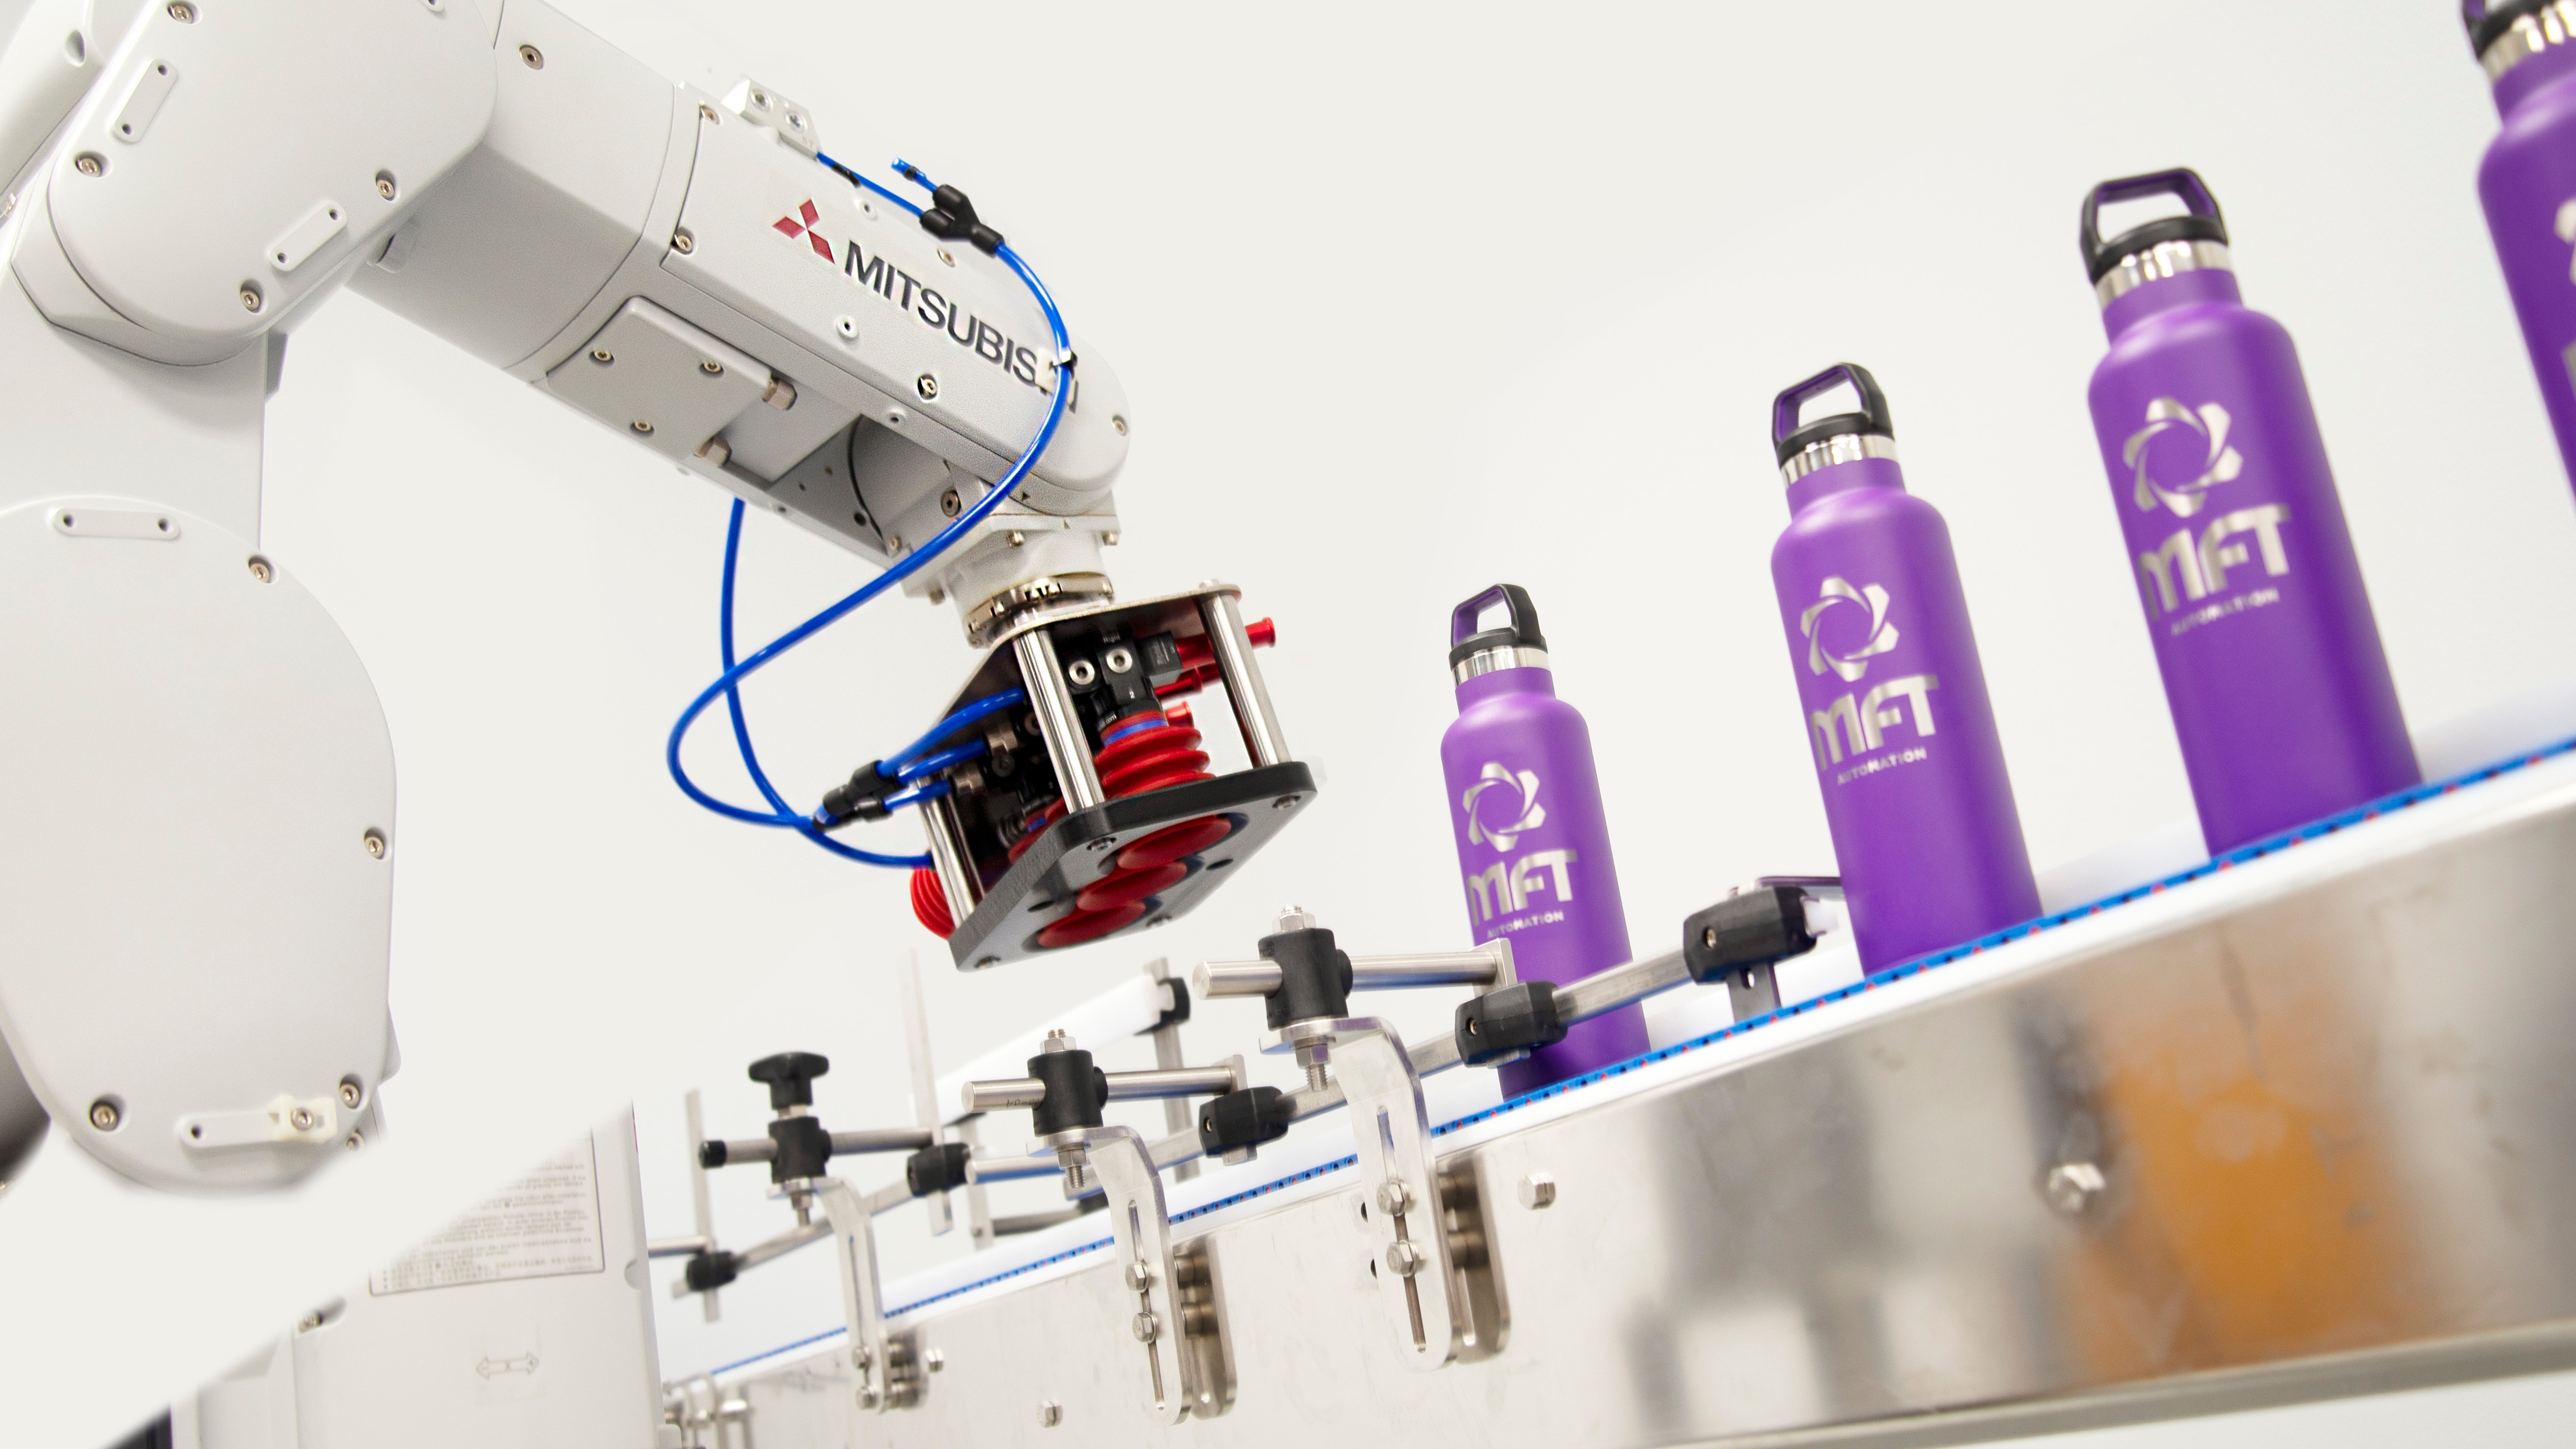 Mitsubishi Robotic arm with water bottles on a conveyor